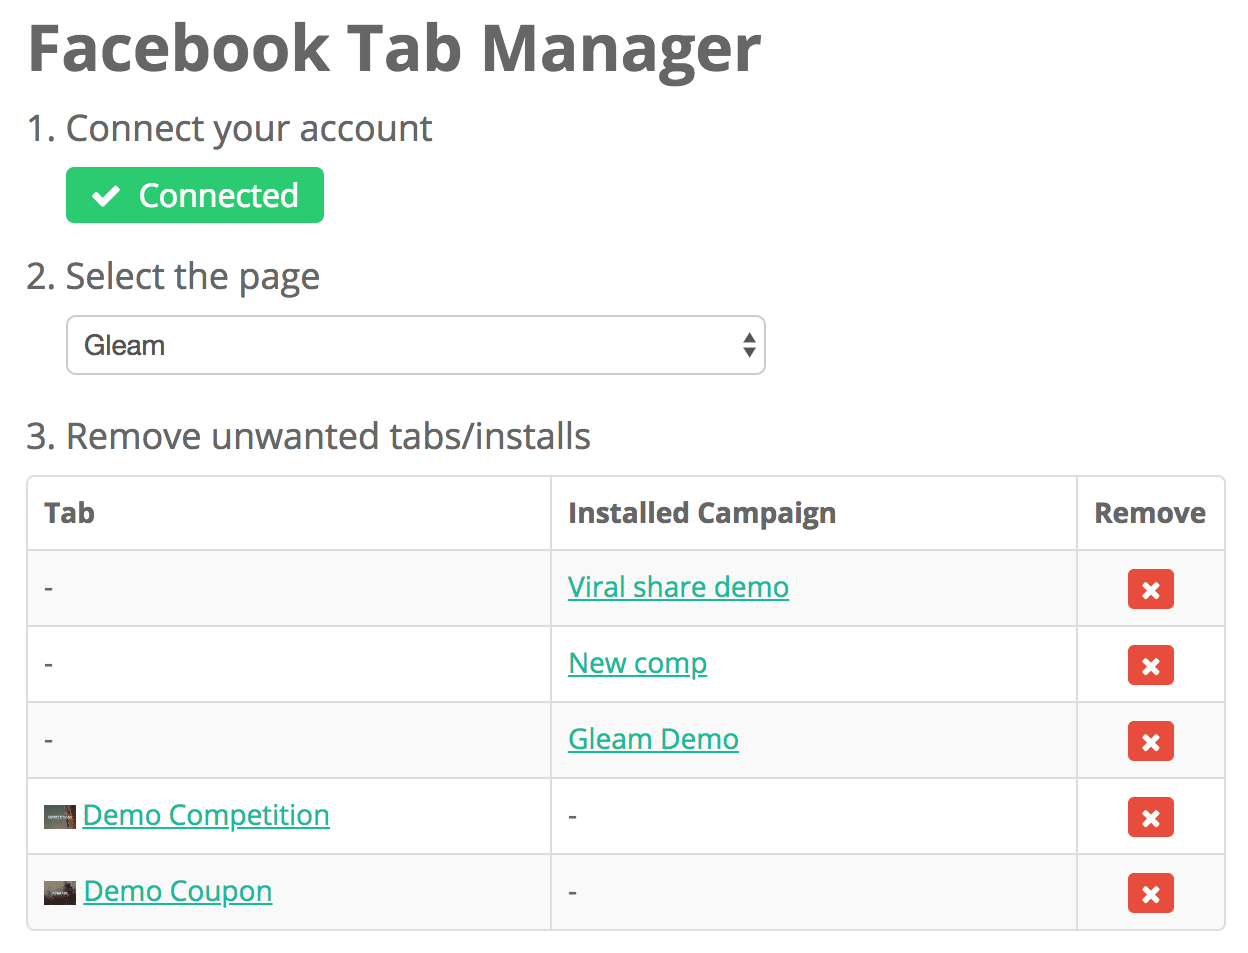 Facebook Tab Manager with Gleam Campaigns installed